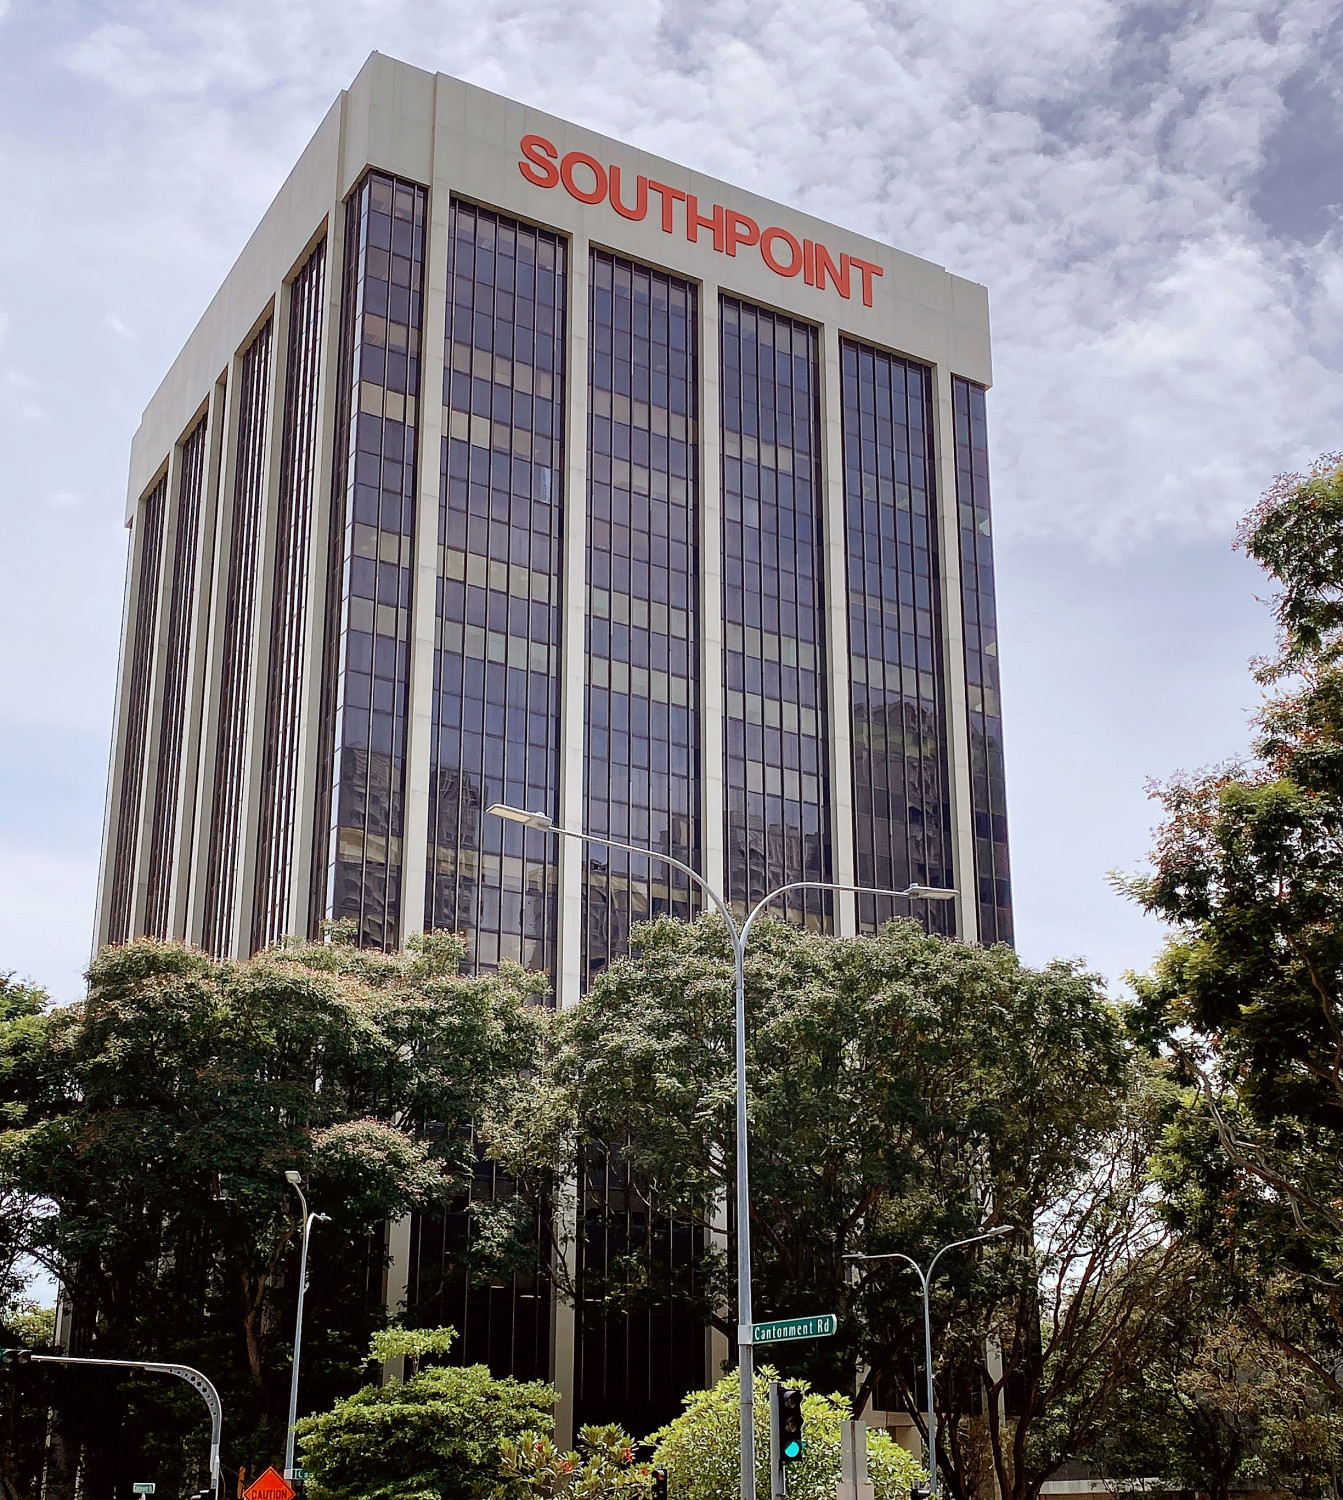 [UPDATE] Office unit at Southpoint for sale via private treaty at $18 mil - Property News